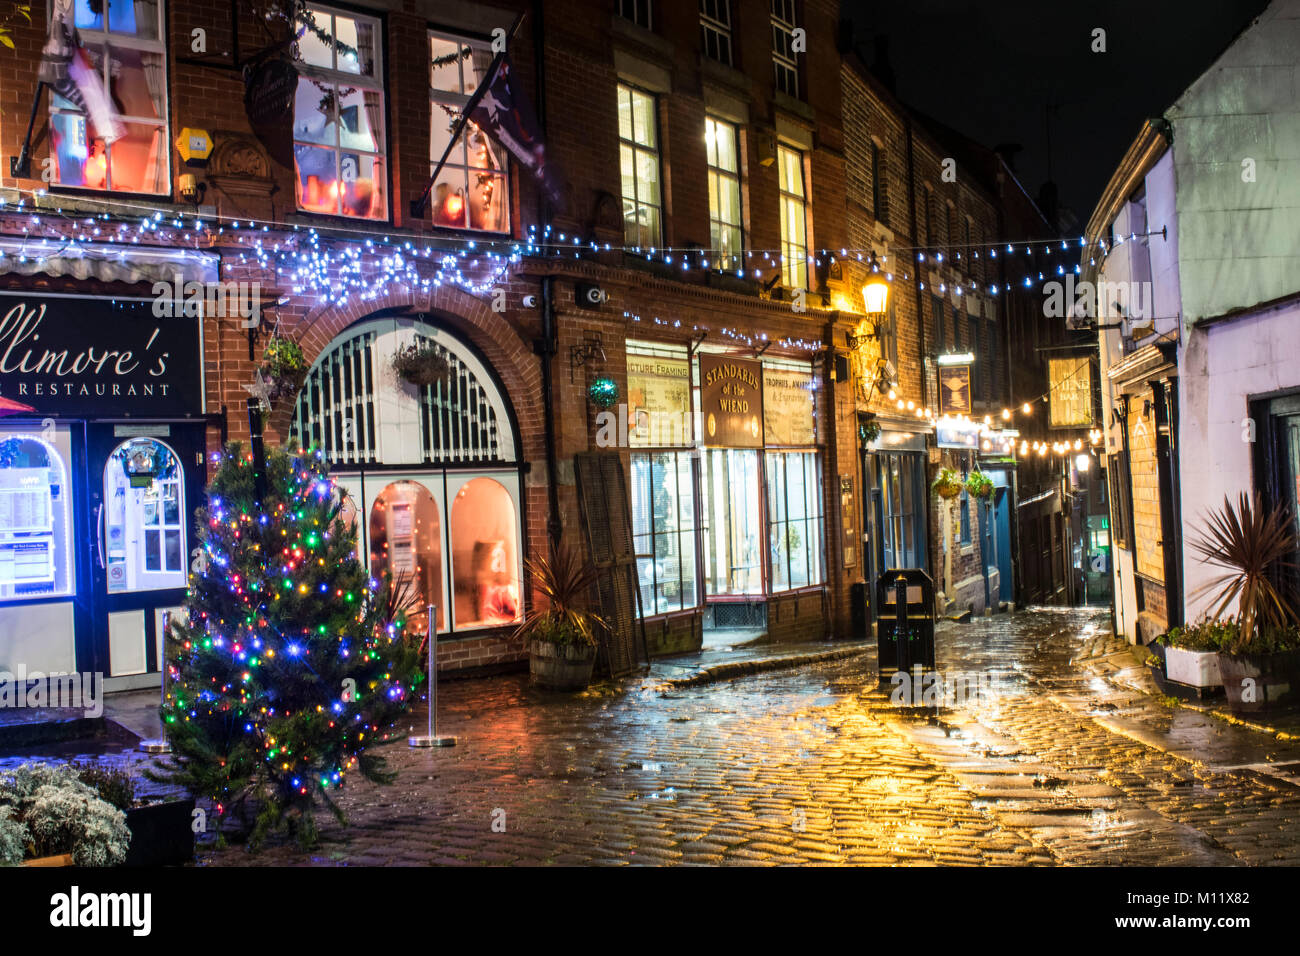 Wigan at Christmas. Very old fashioned scene here, looks great after being taken in the rain, reflects the light very well. Stock Photo